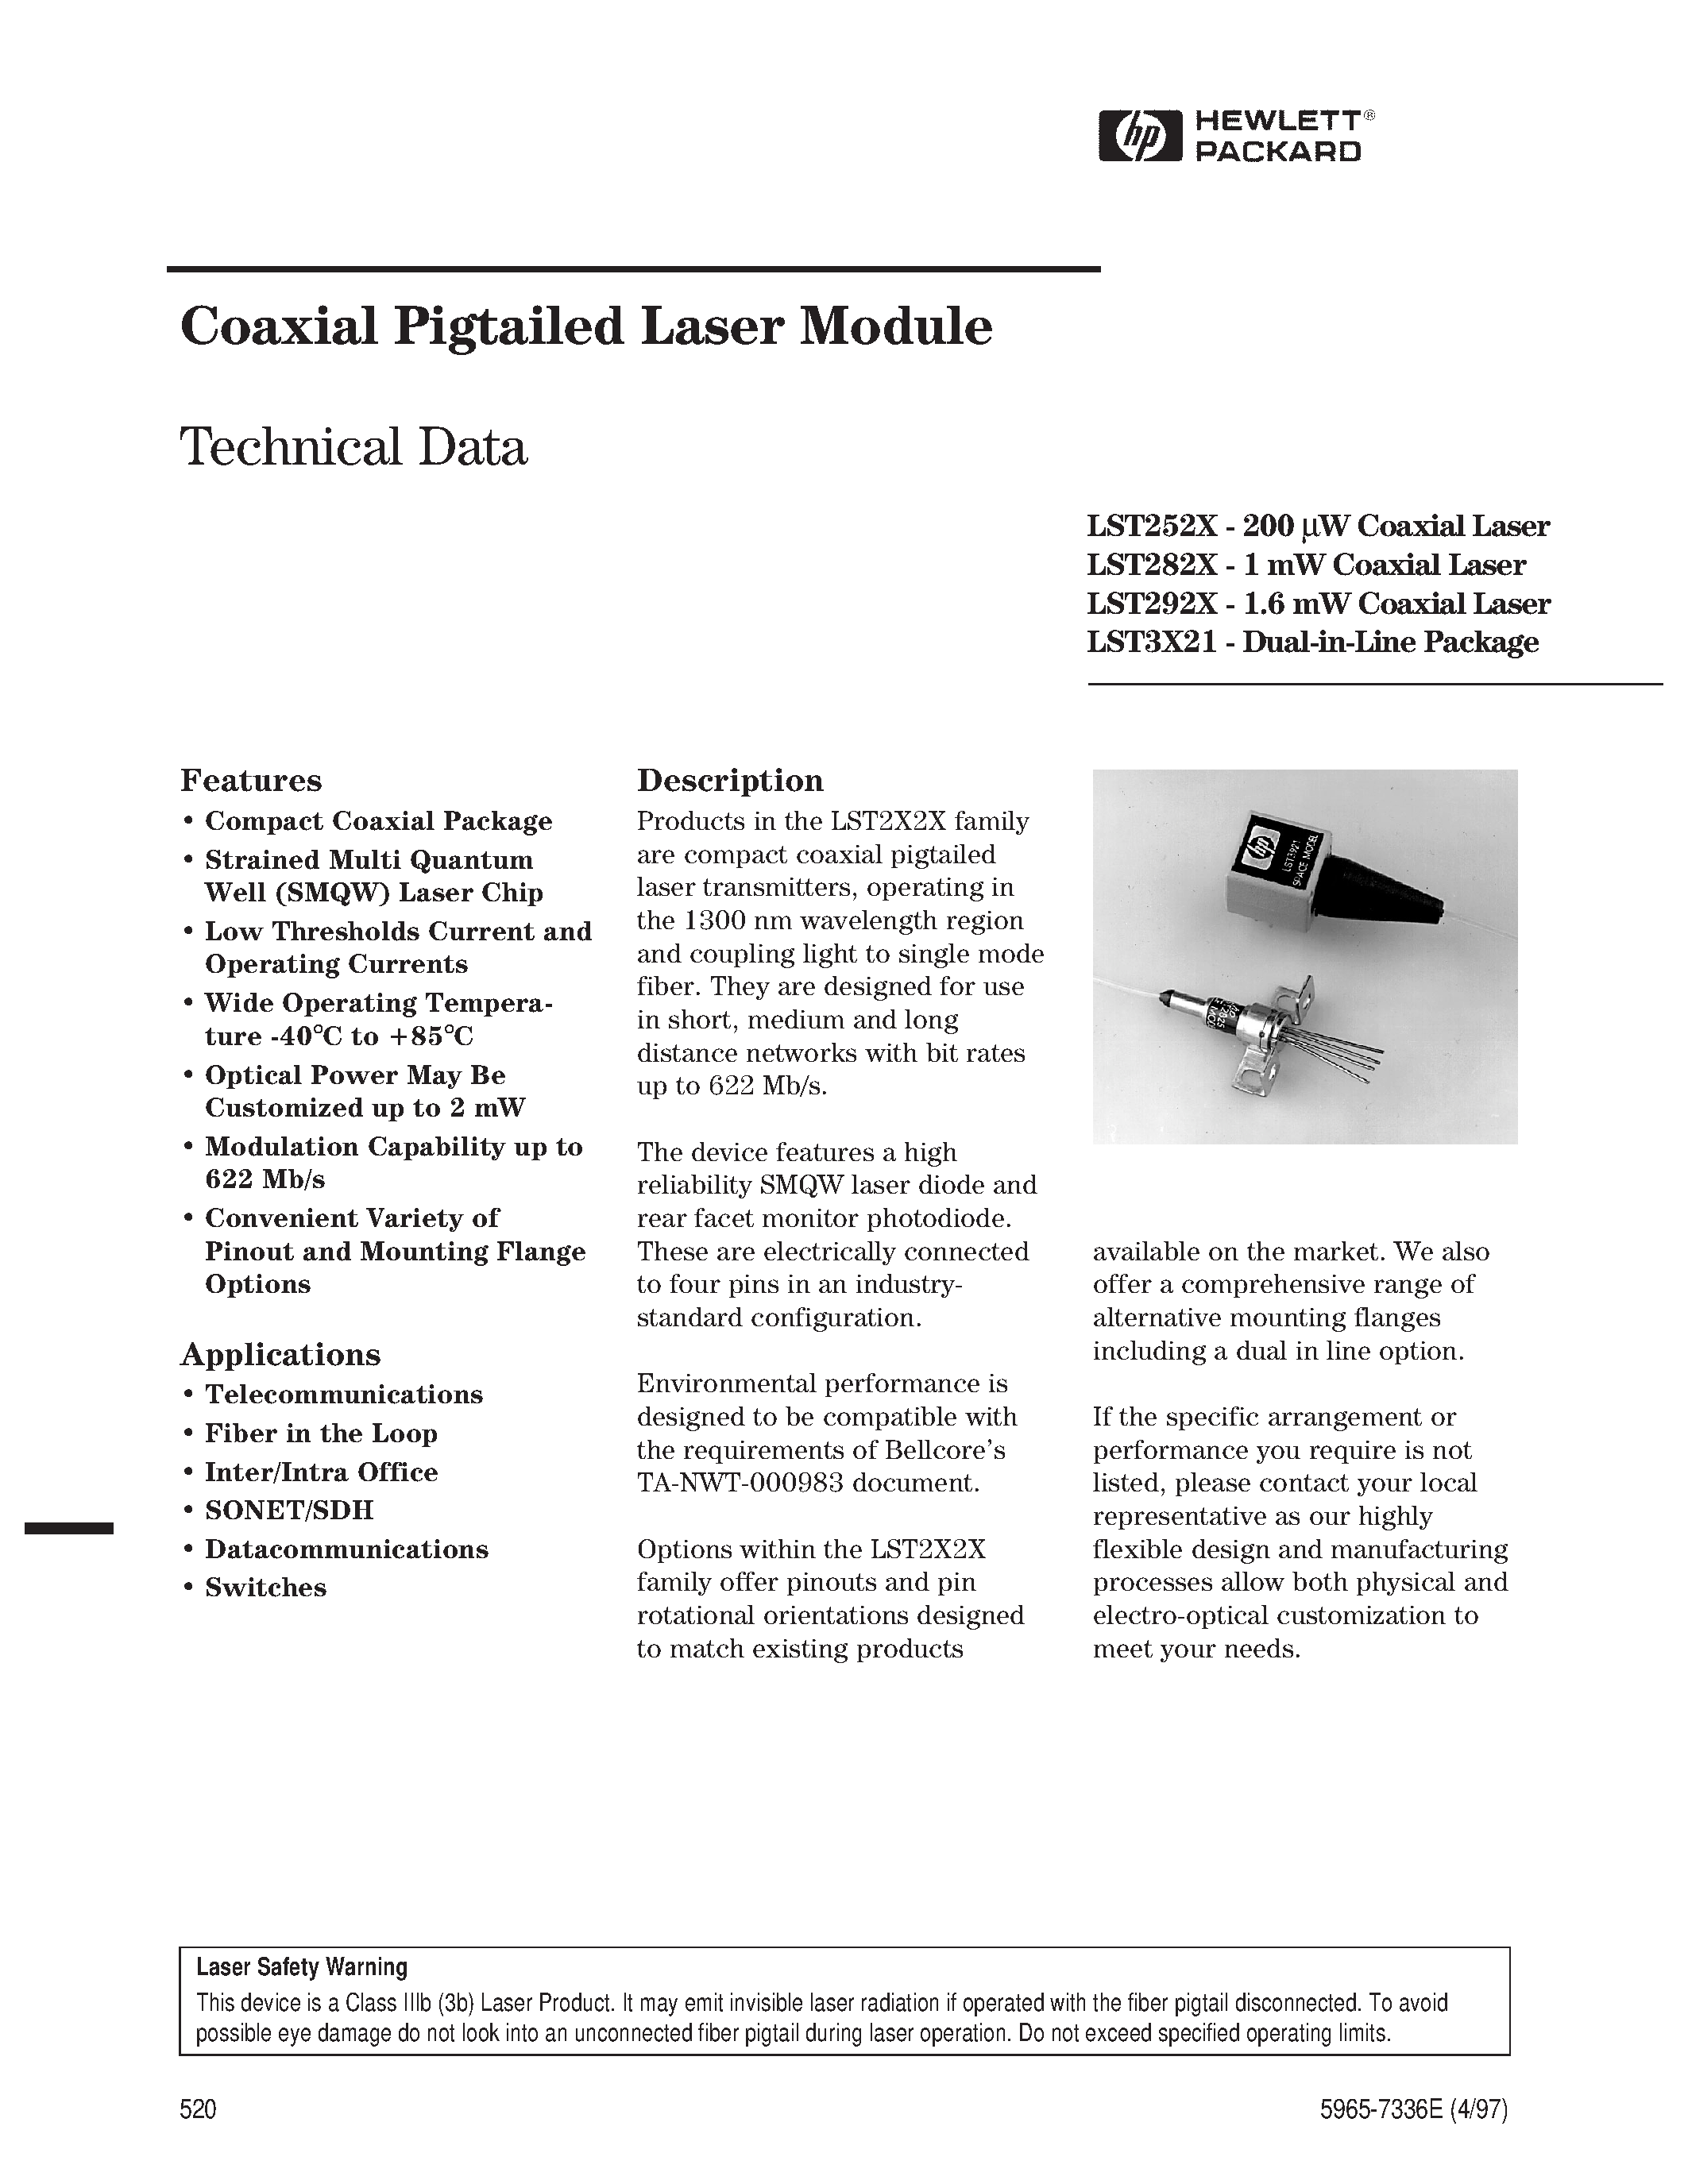 Datasheet LST2925-S4-B-SF - Coaxial Pigtailed Laser Module page 1